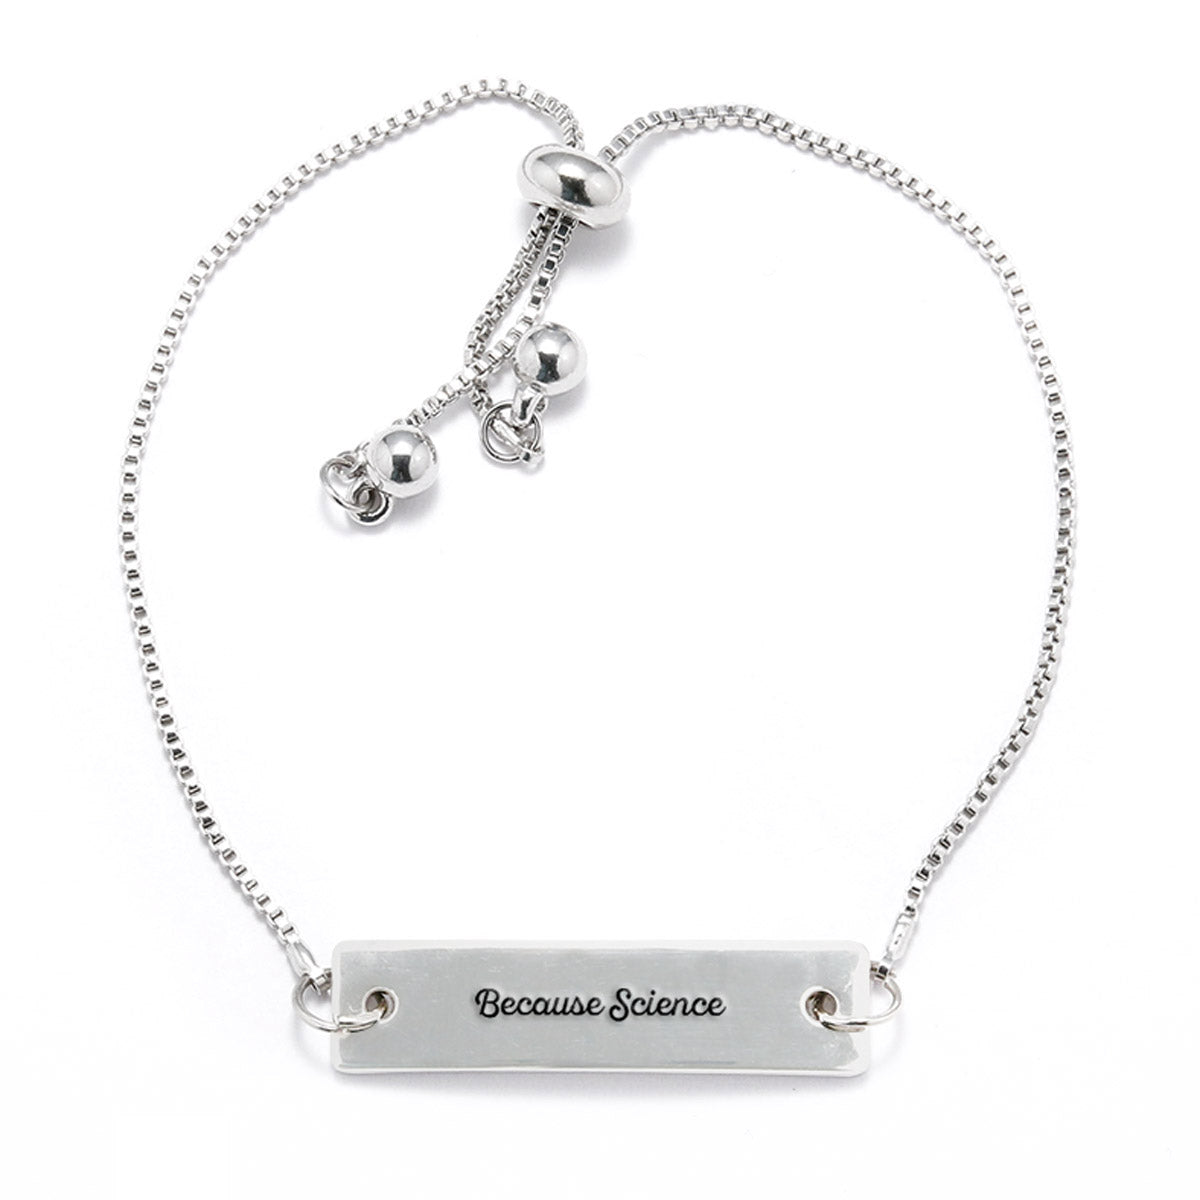 Why? Because Science Silver Bar Adjustable Bracelet - pipercleo.com